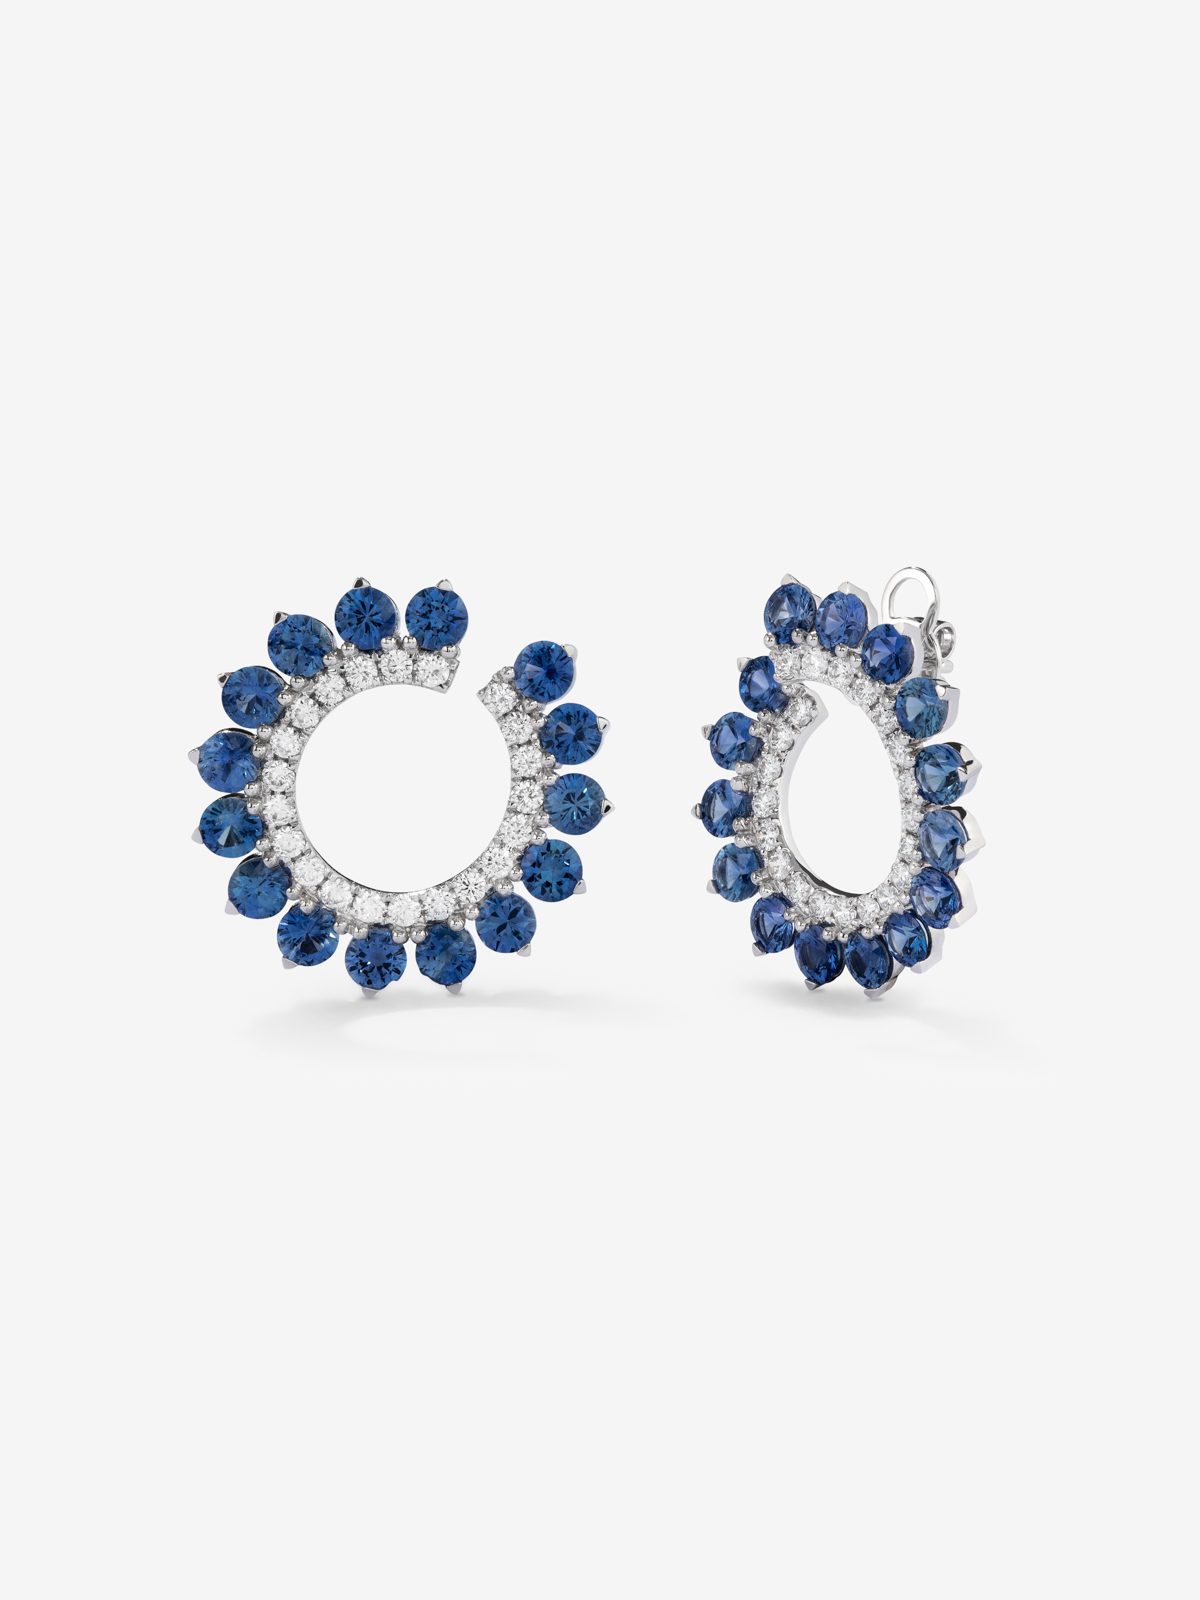 18K White Gold Aro Earrings with Blue Zafiros in Bright Size 5.85 Cts and White Diamonds in Bright Size of 1 CTS